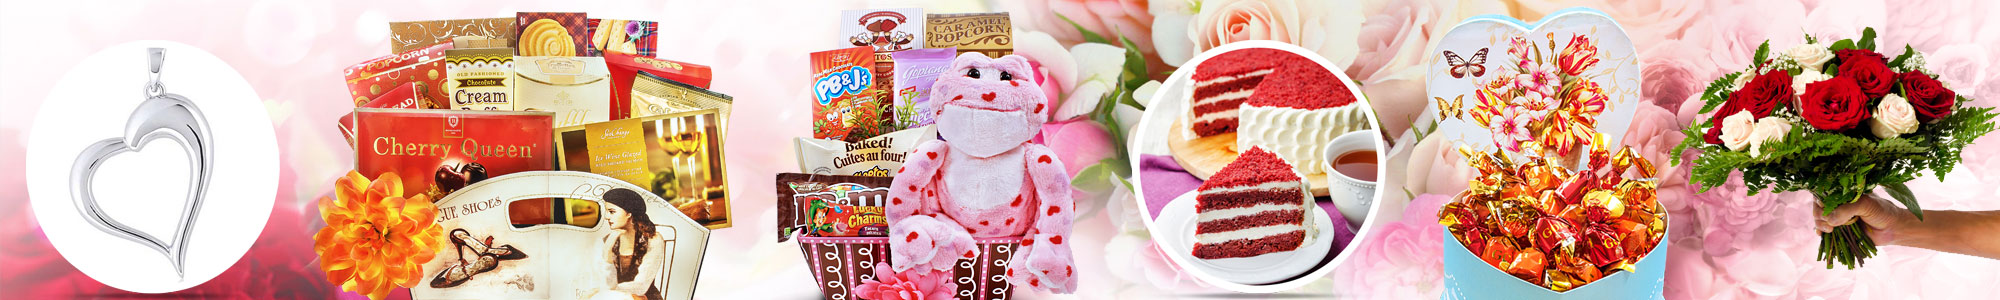 Valentine's Day gifts by Gourmet Gift Basket Store